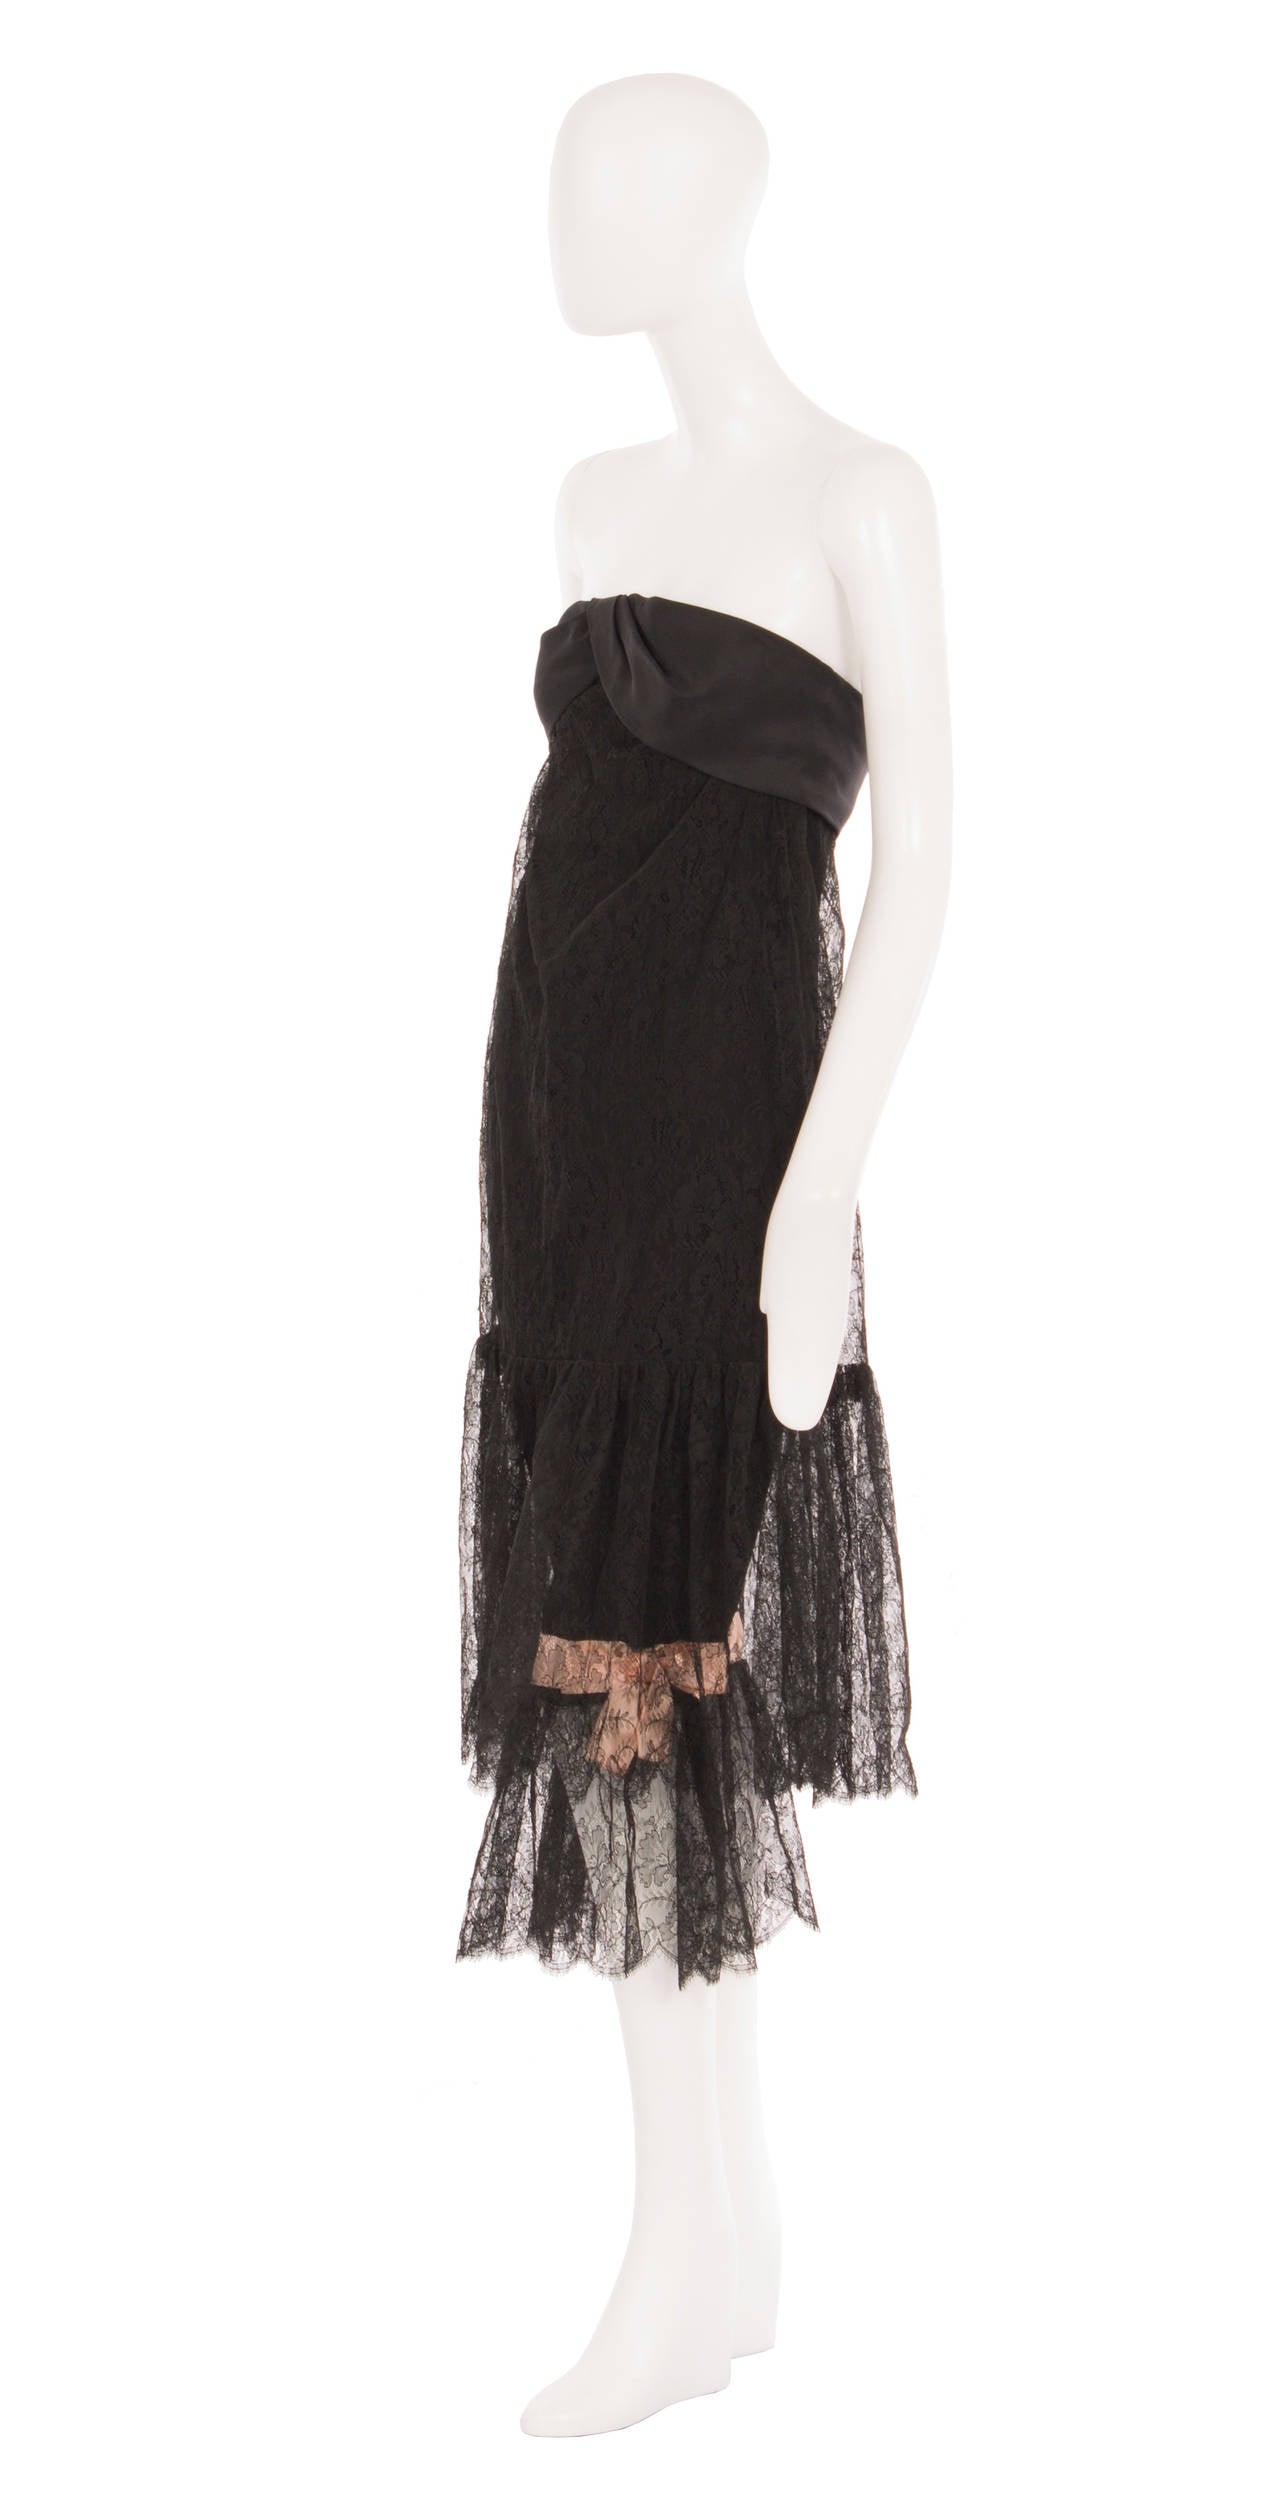 A rare piece of haute couture by Balenciaga for his Eisa label, this cocktail dress features a pair of integral pantalettes. Constructed of black Chantilly lace, the strapless dress features a bandeau of black silk taffeta across the bust, and a